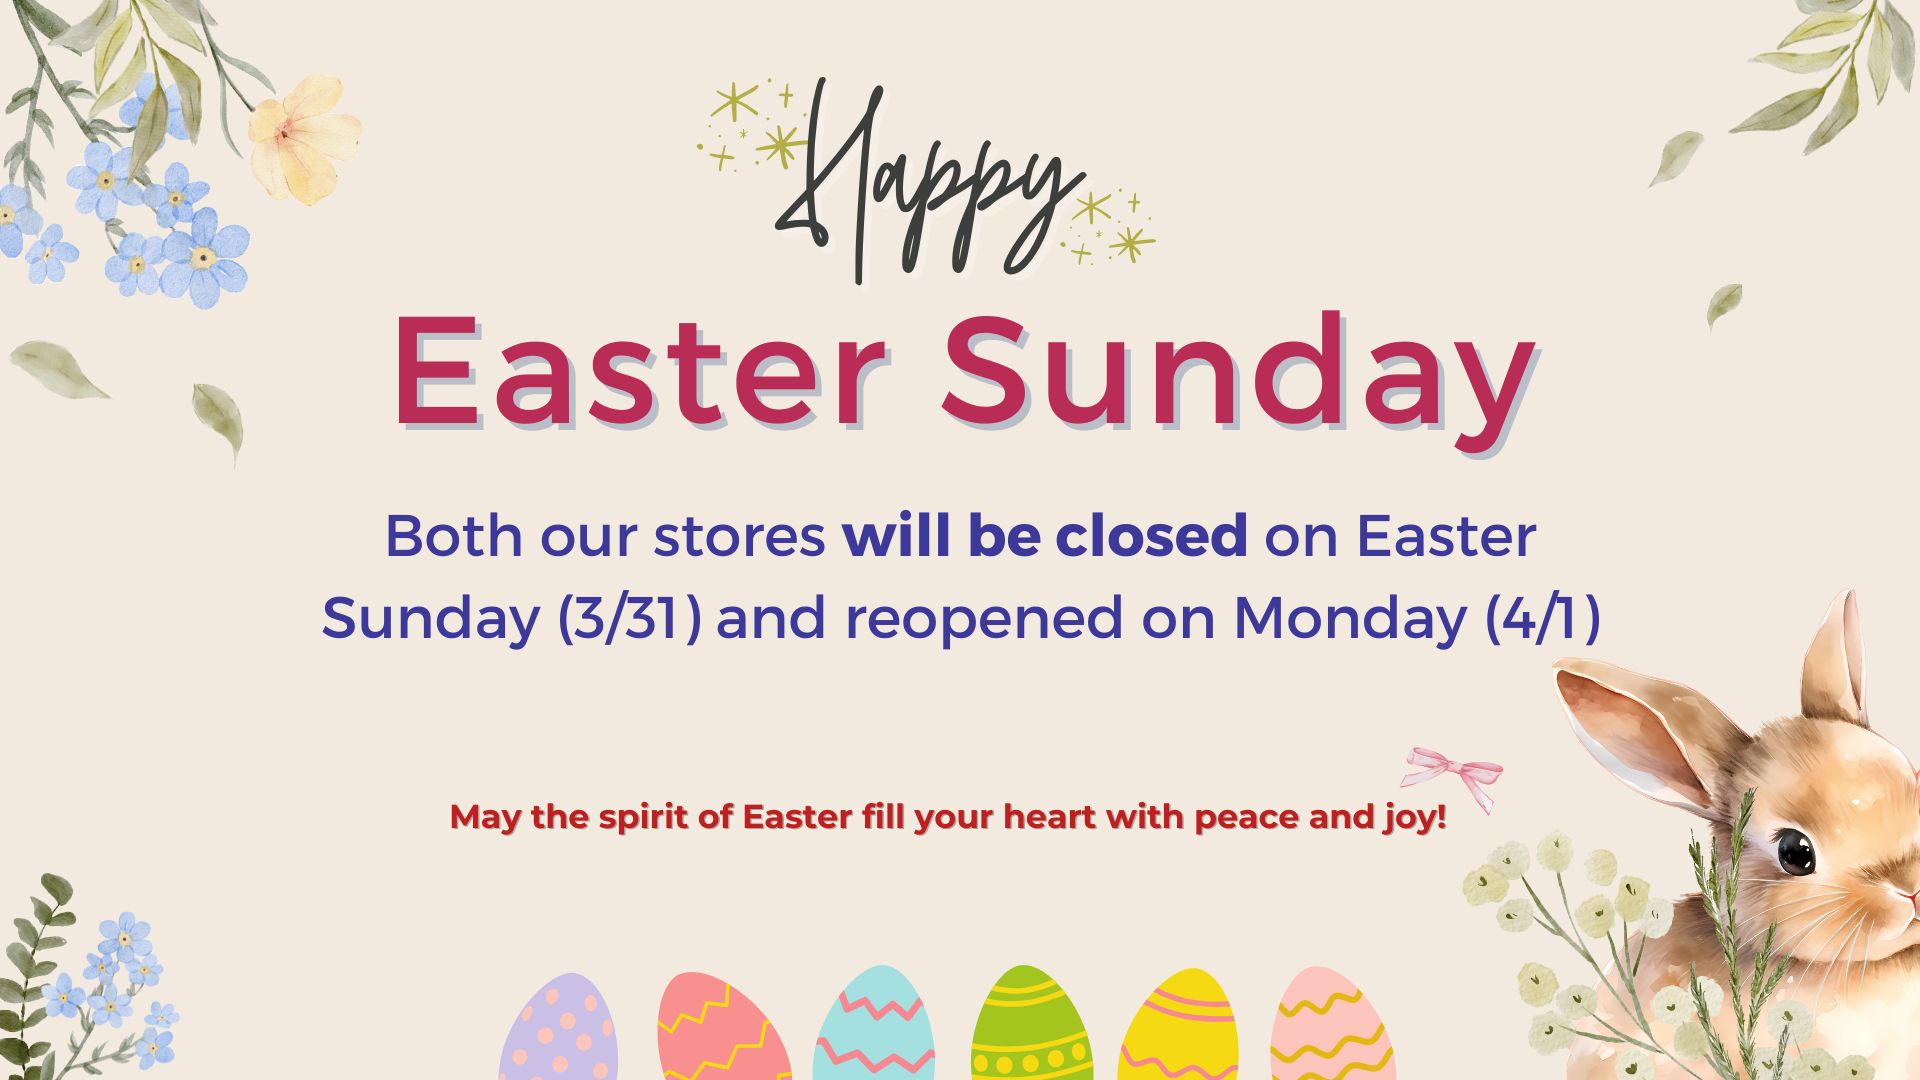 Easter Sunday Both our stores will be closed on Easter Sunday 3/31 and reopened on Monday 4/1